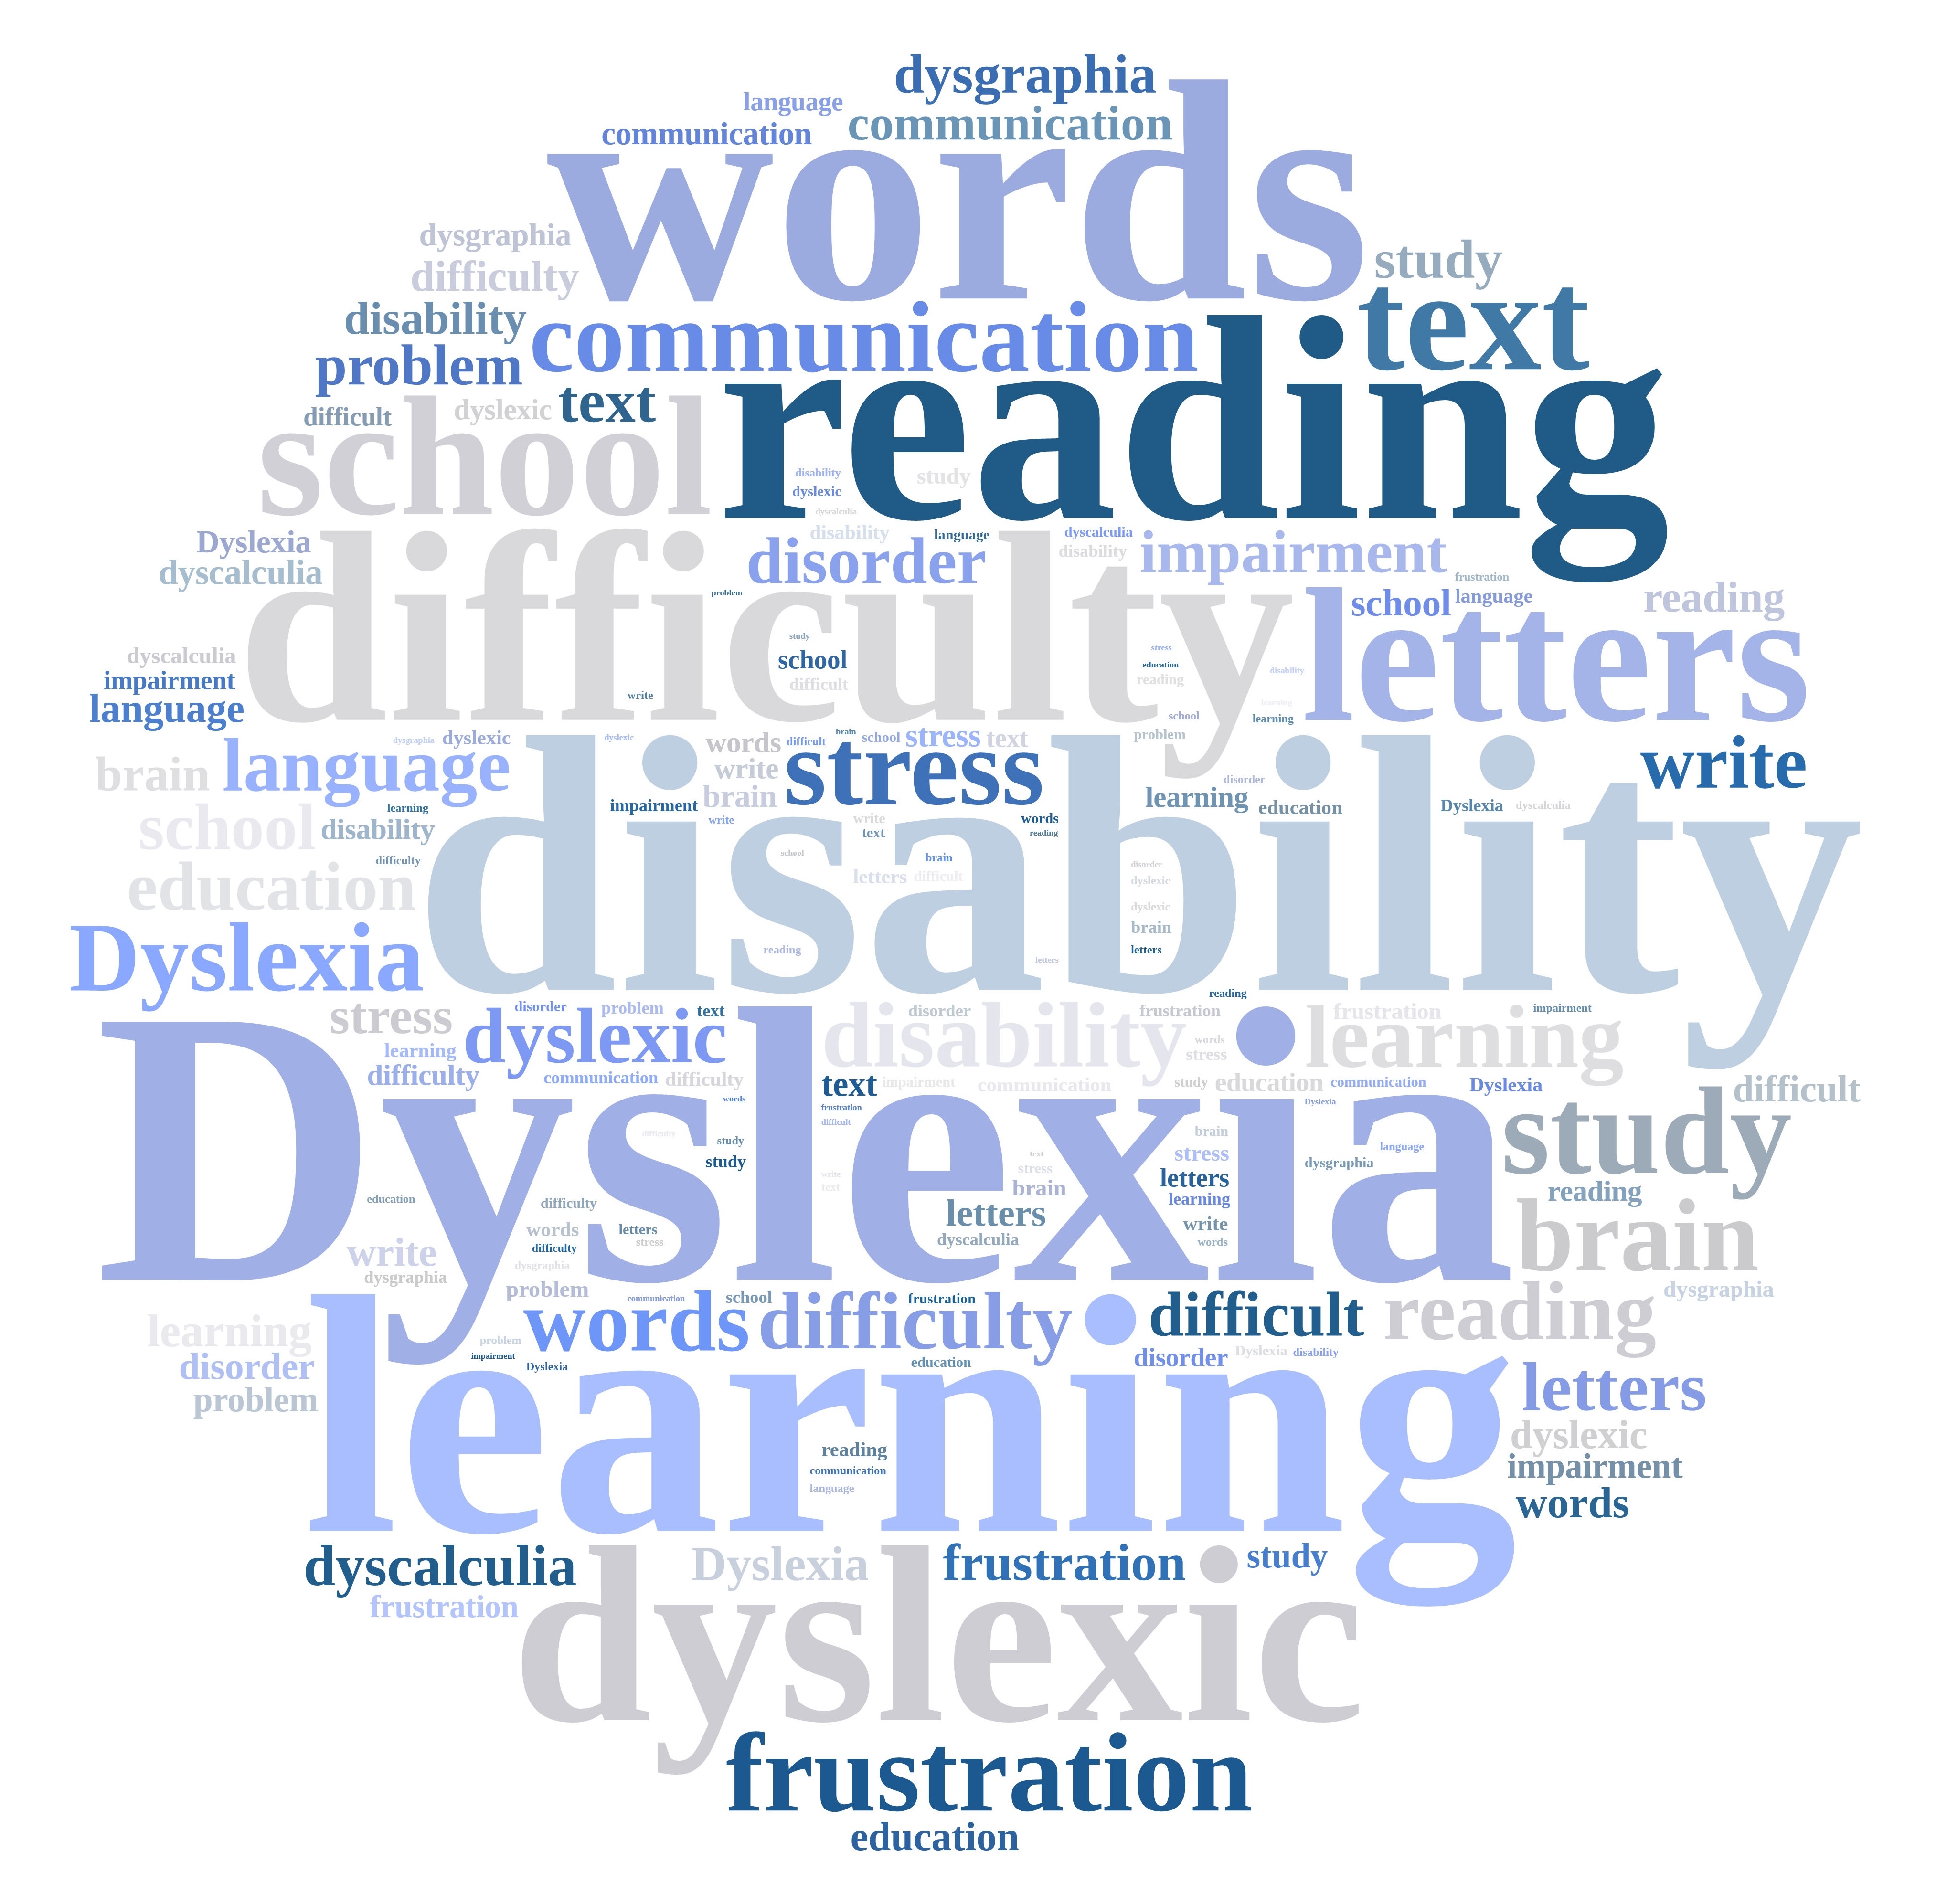 text 'dyslexia' 'words' 'learning' 'difficulty' 'disability' arranged into a circle